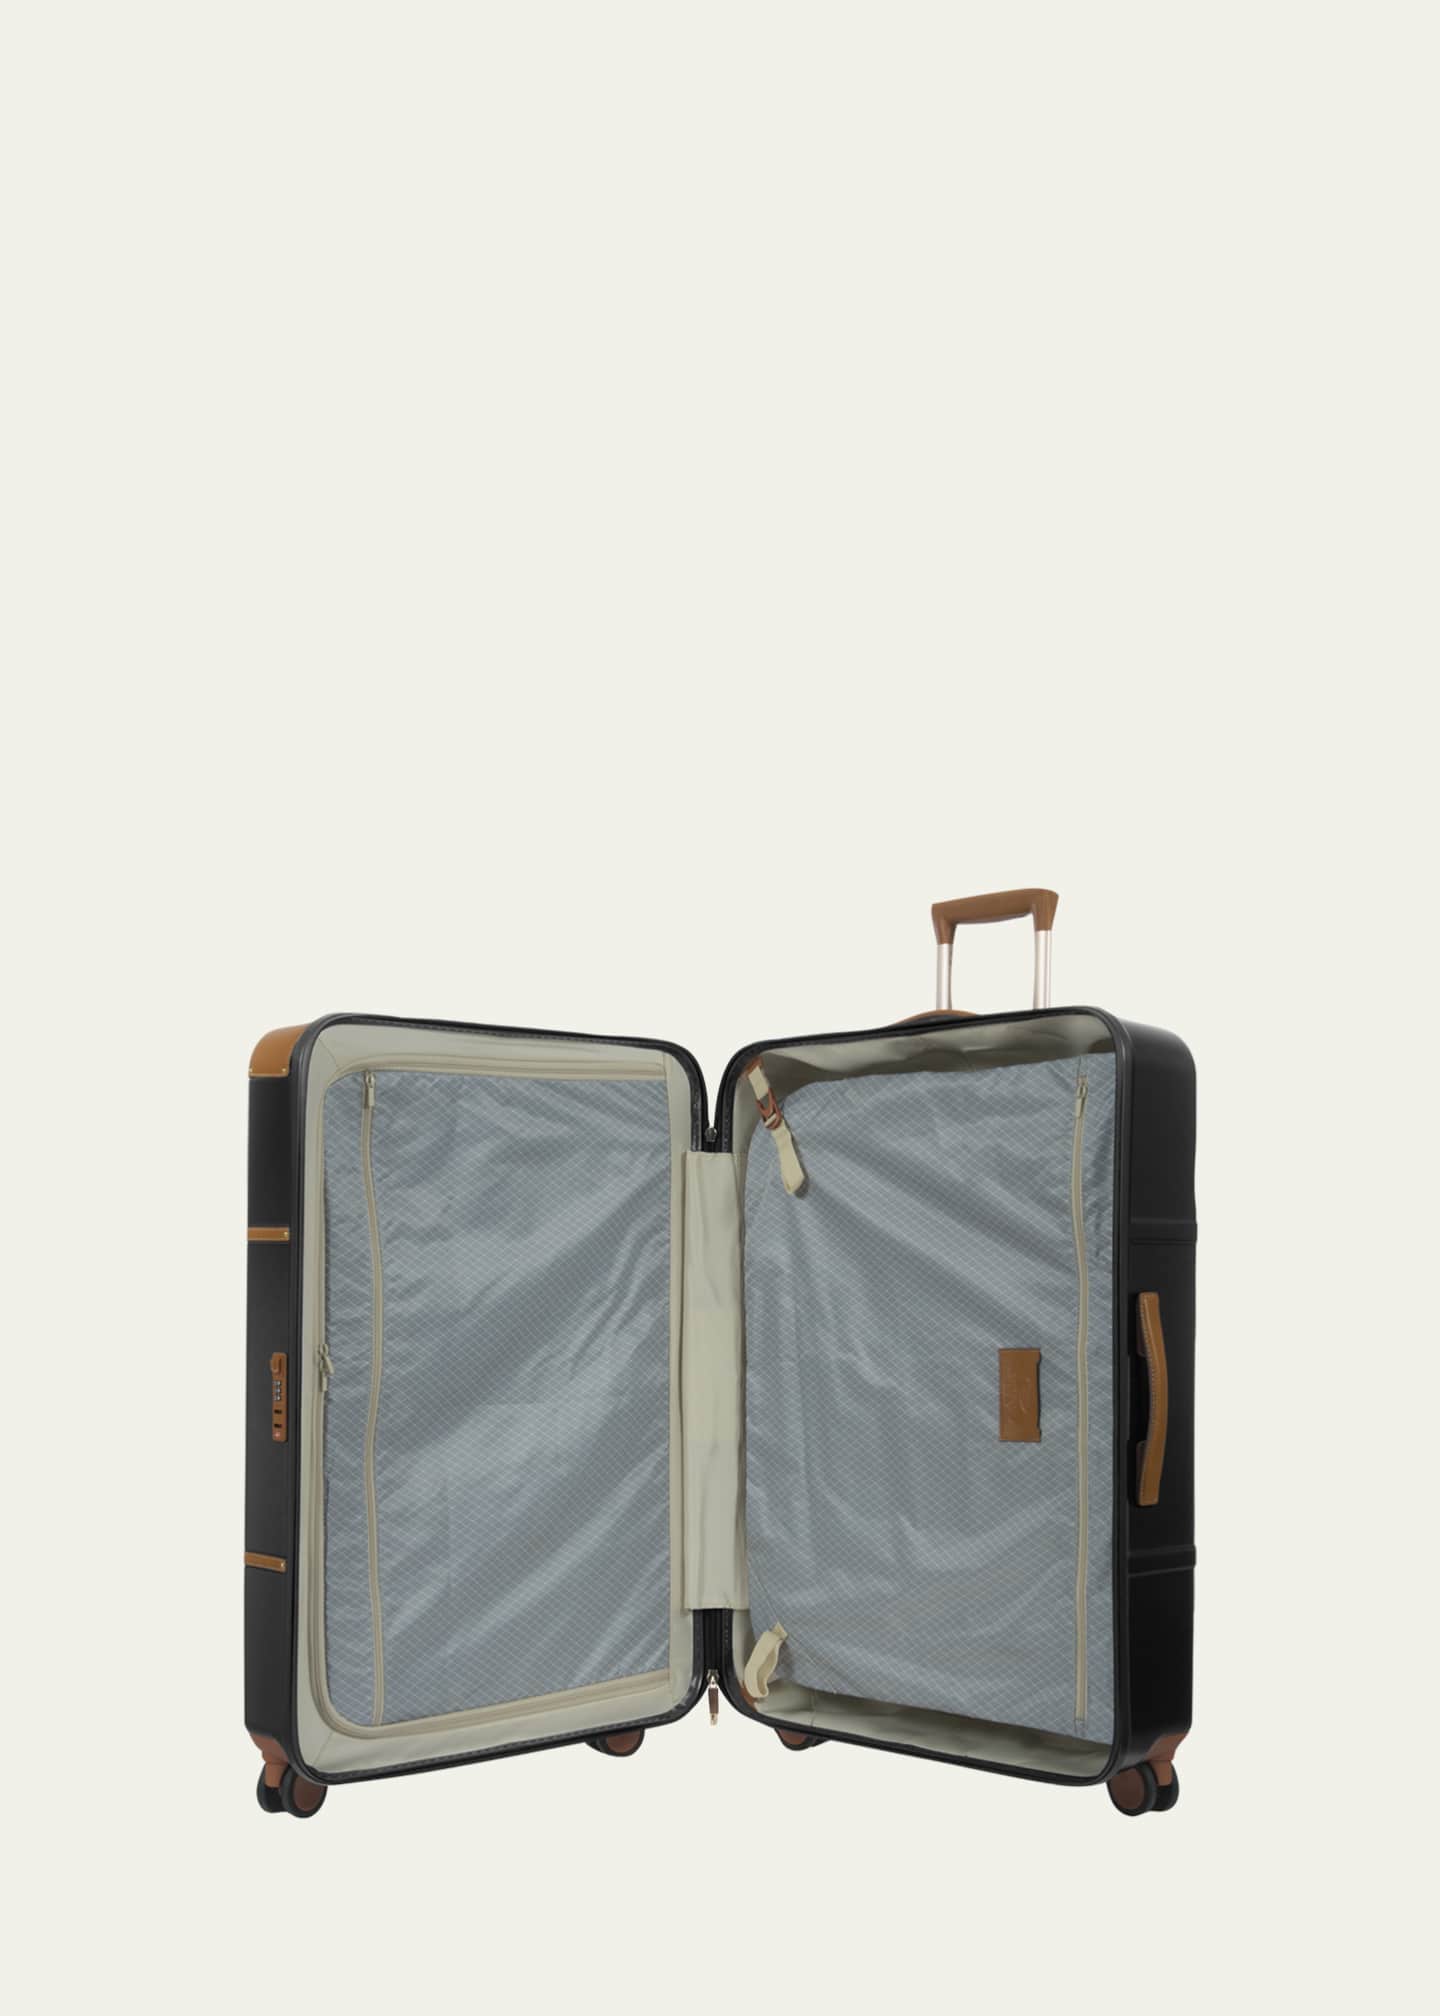 Bric's Bellagio 32" Spinner Luggage Image 2 of 2